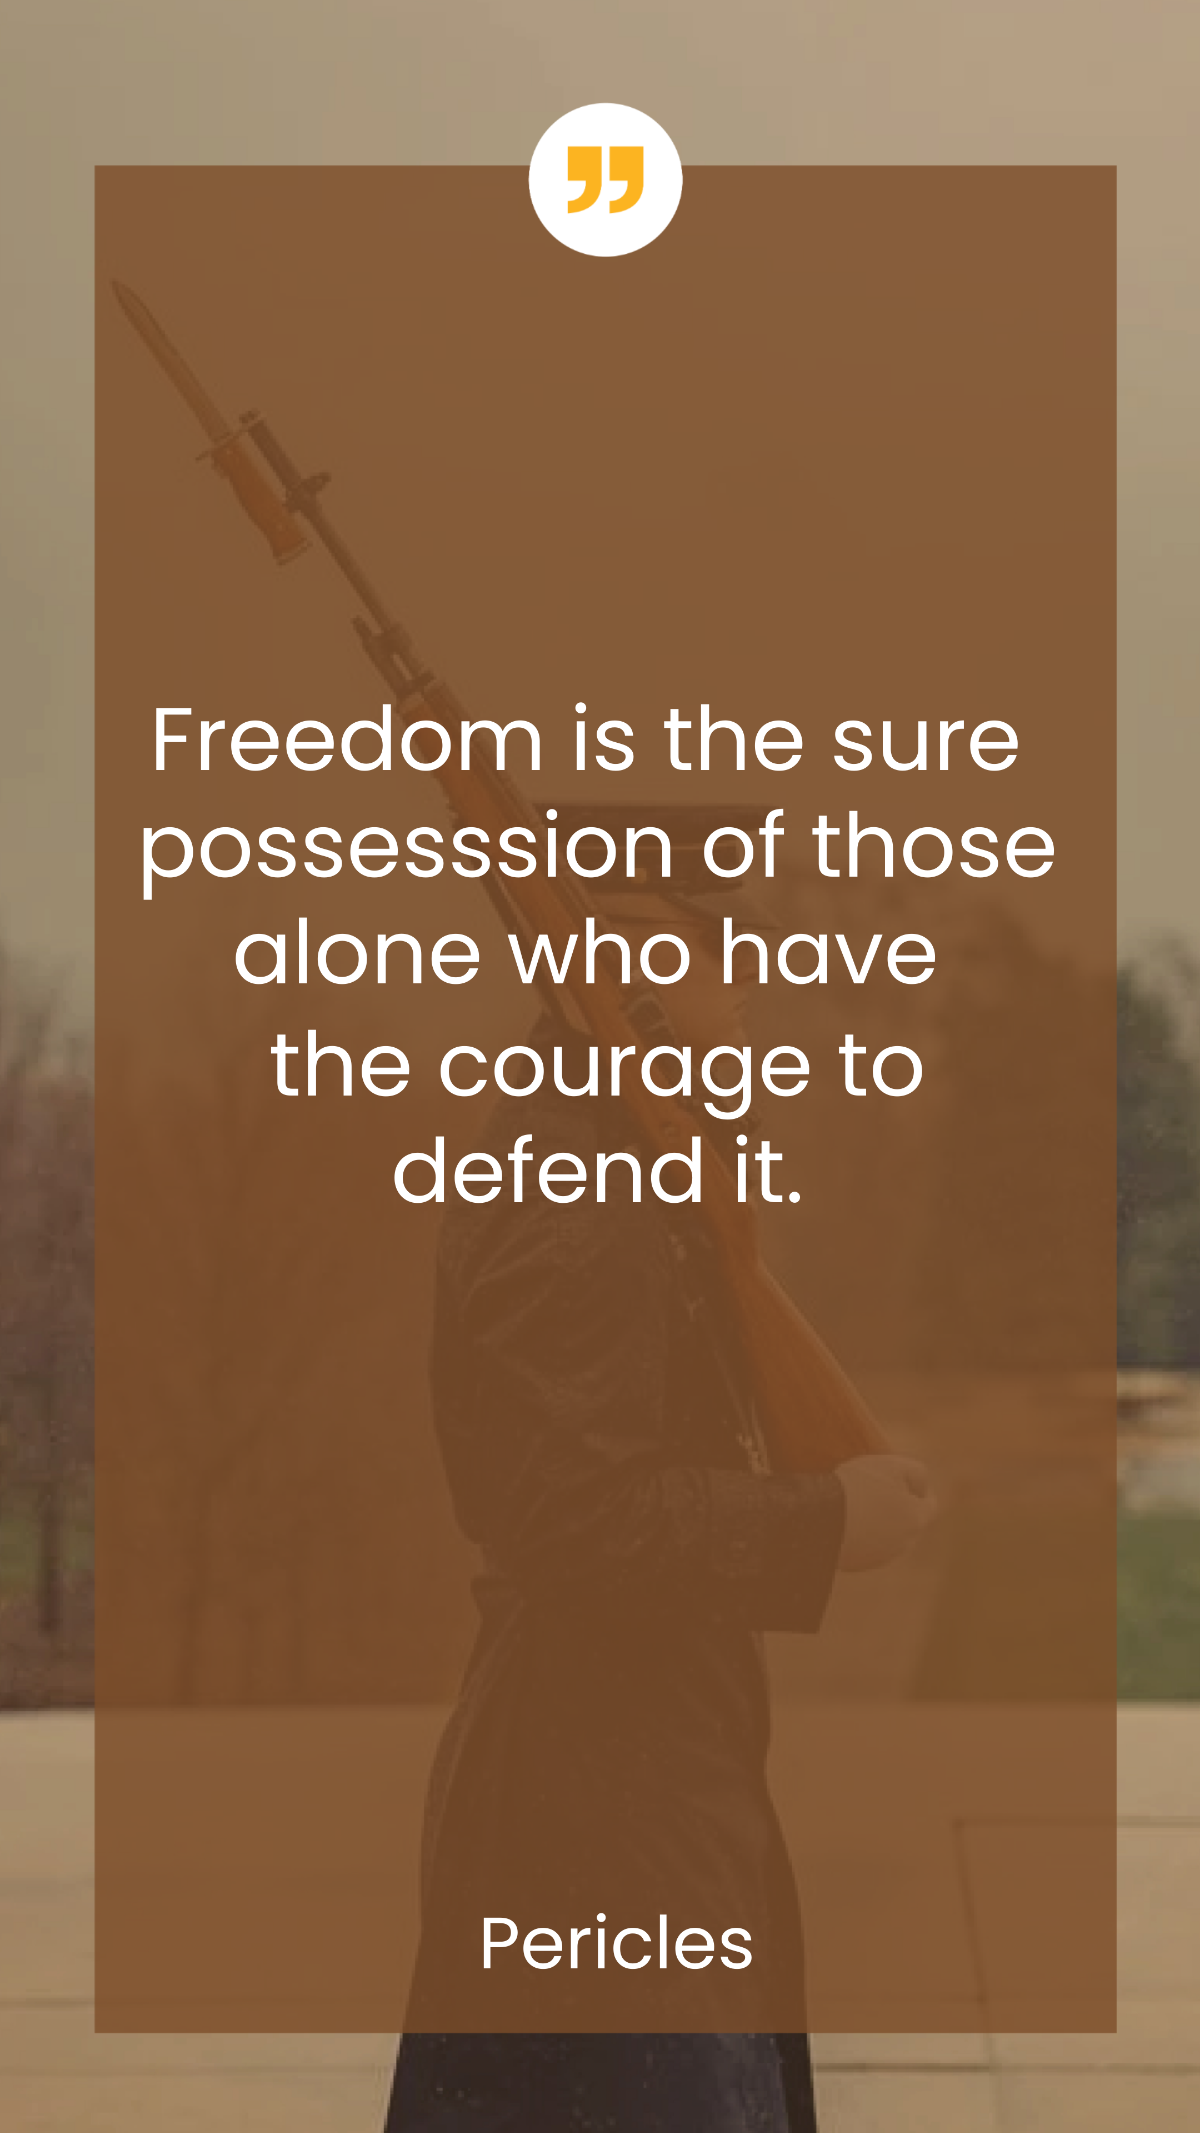 Pericles - Freedom is the sure possession of those alone who have the courage to defend it.